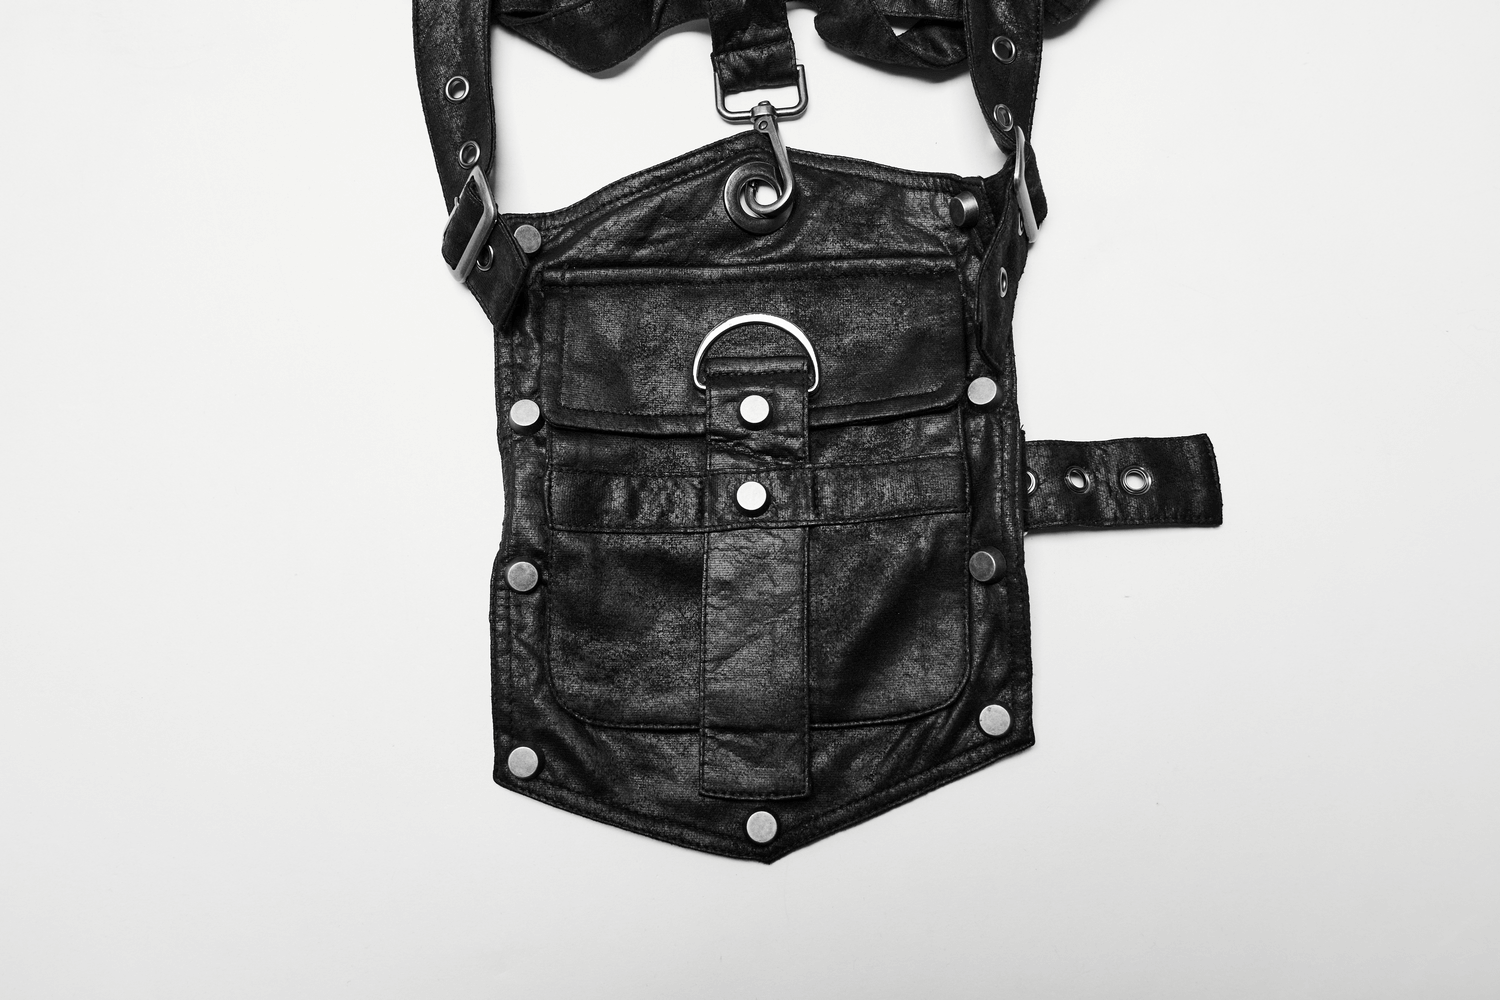 Edgy Shoulder Armor with Adjustable Buckles and Straps